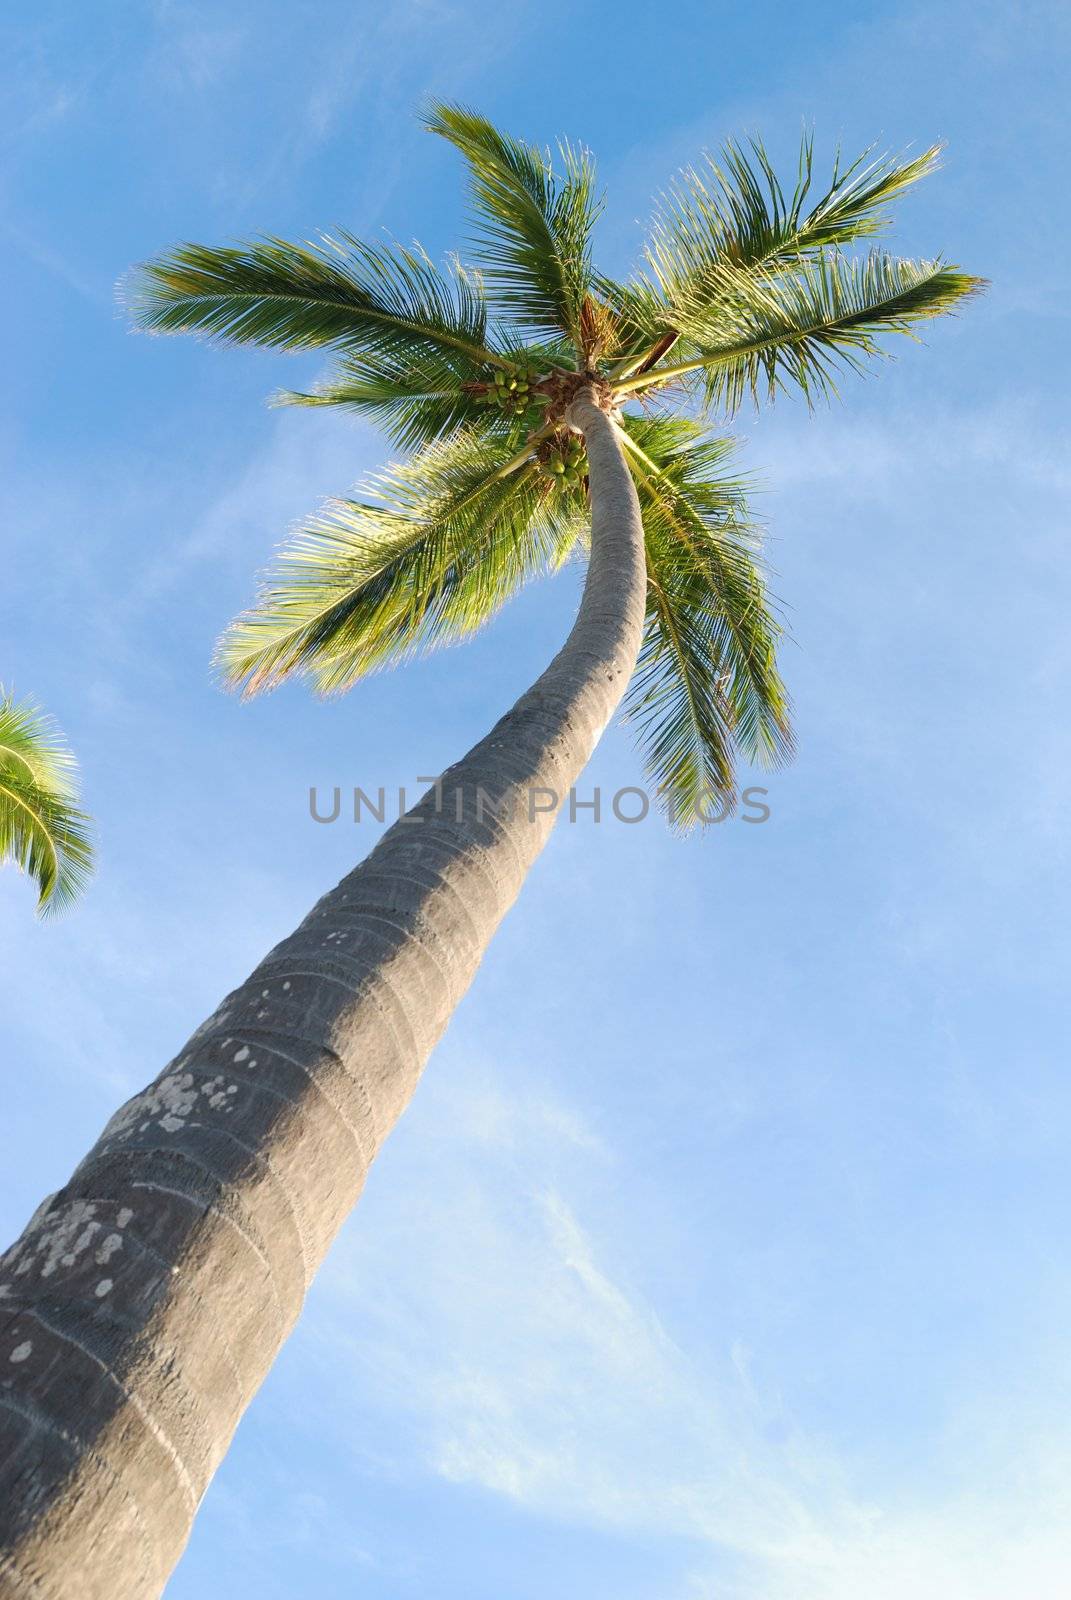 Palms against sky by haveseen